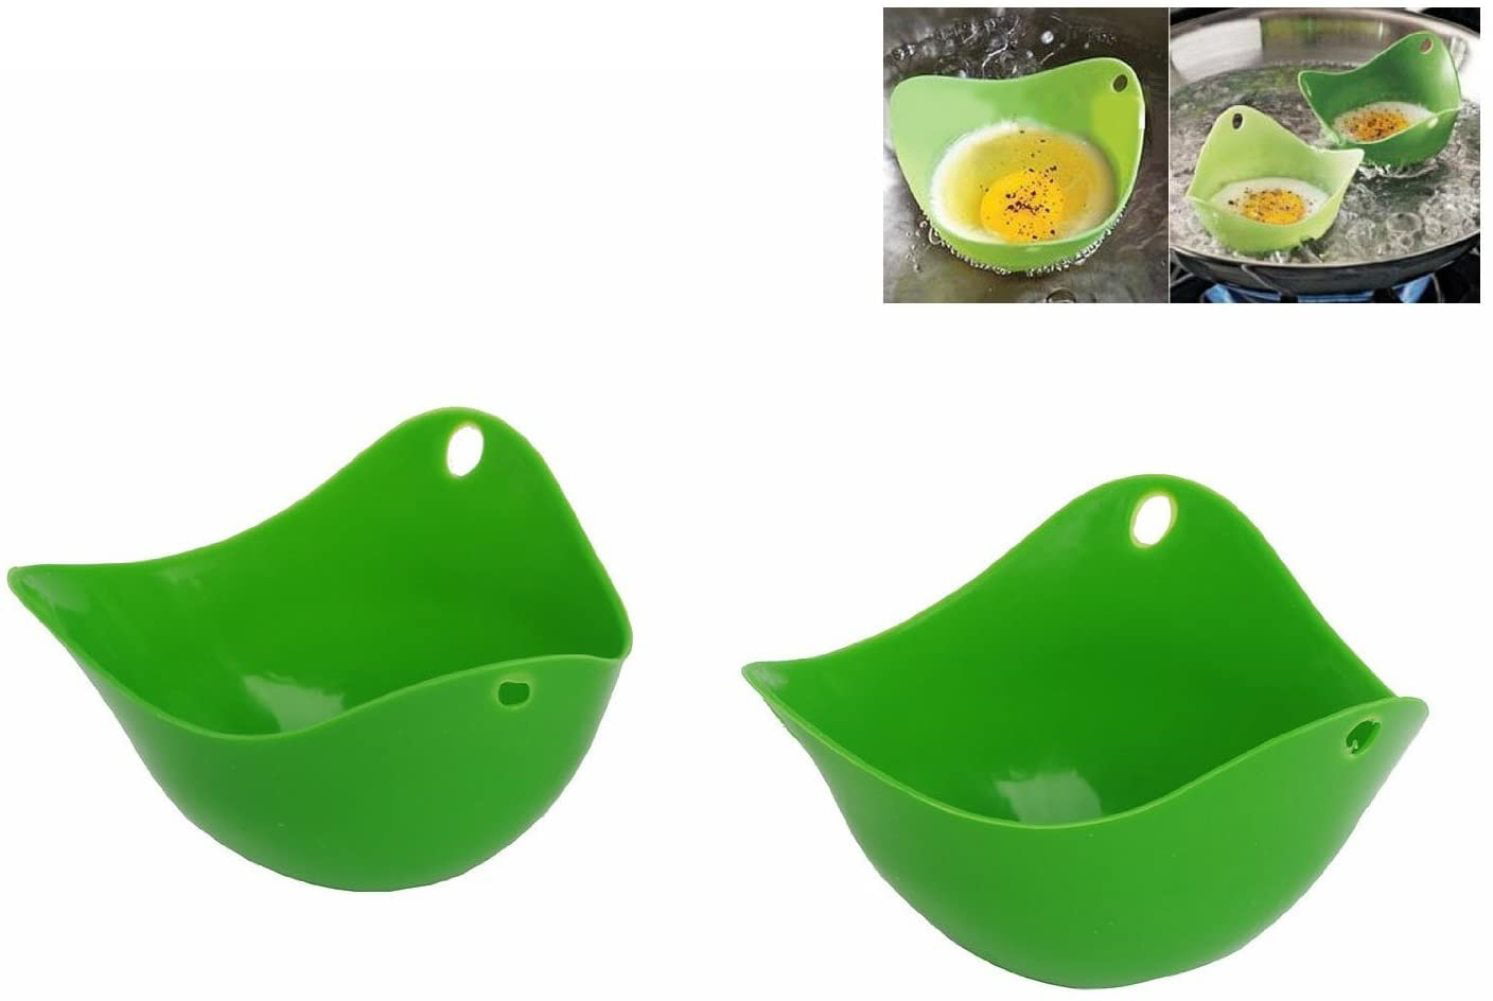 2PCS Silicone Egg Poacher Cups with Ring Stand Egg Cooking Tools Random Color 